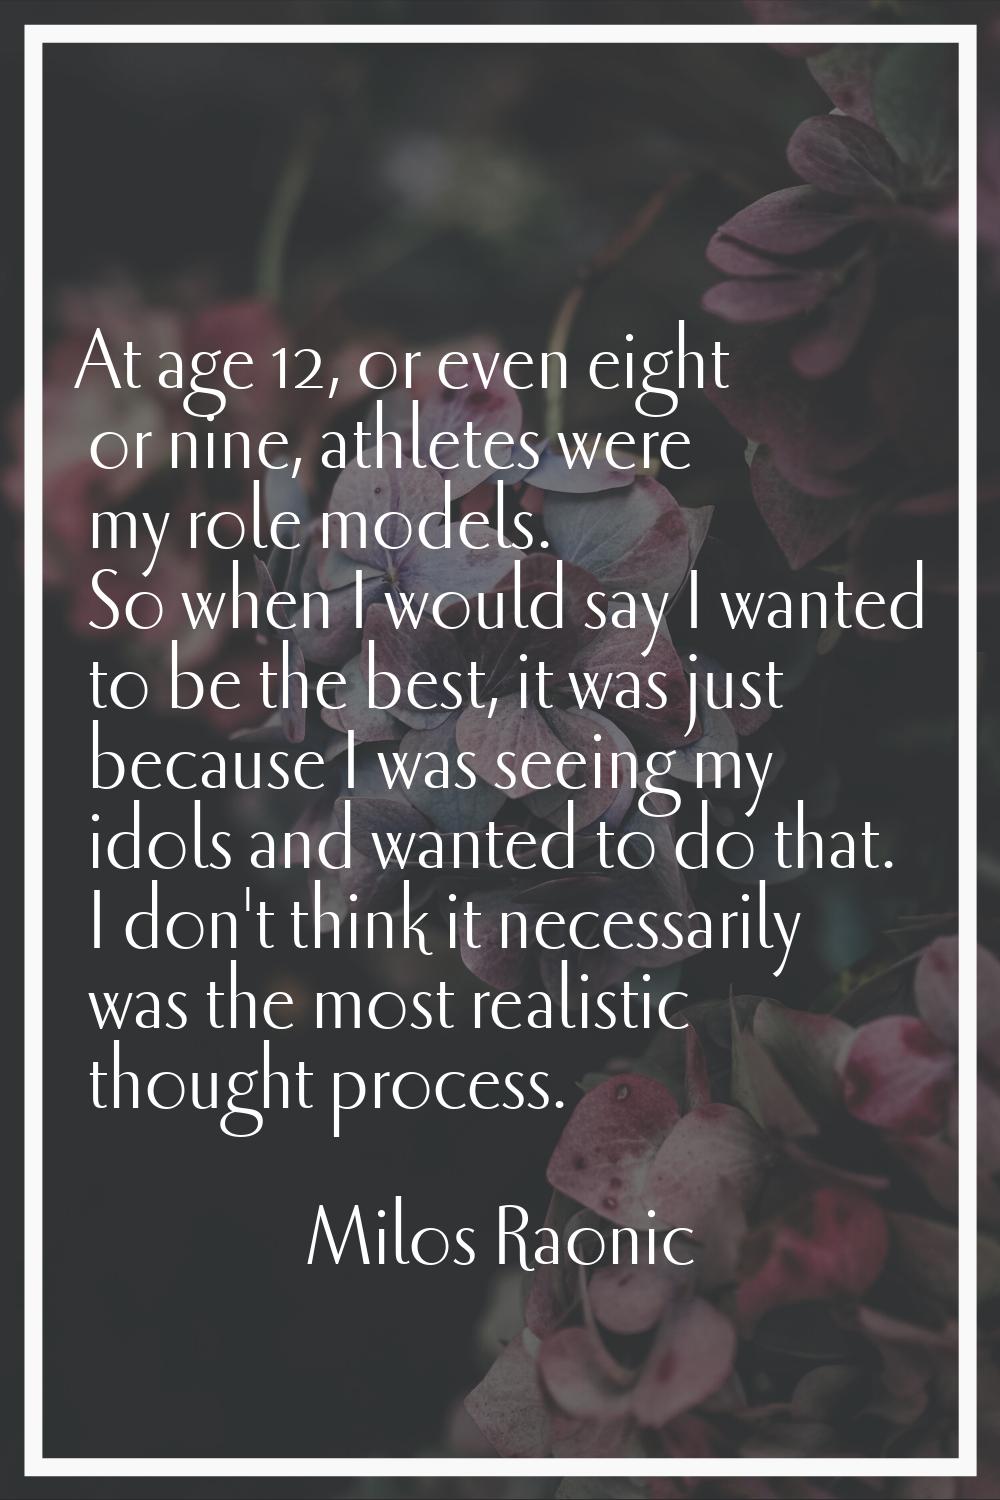 At age 12, or even eight or nine, athletes were my role models. So when I would say I wanted to be 